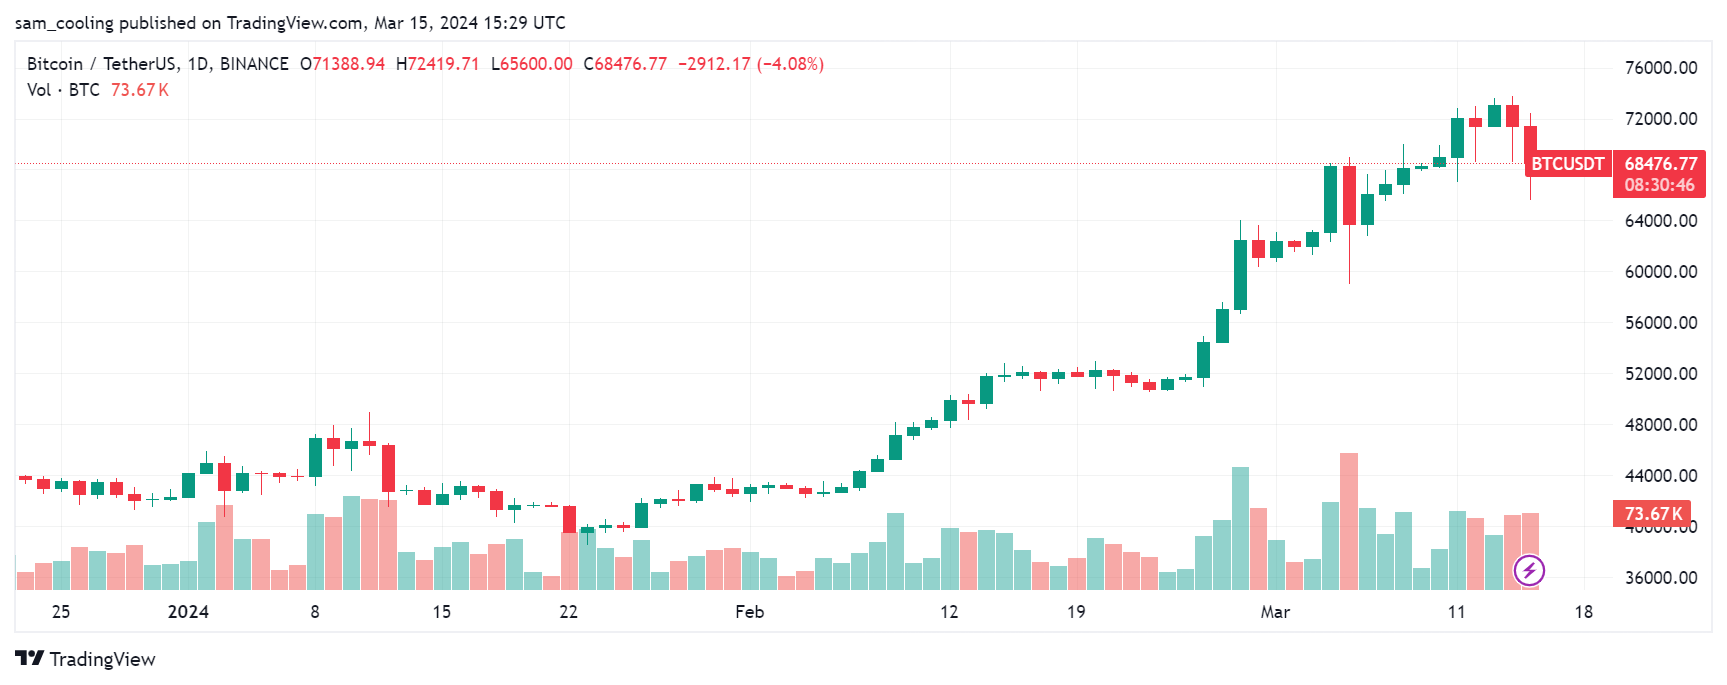 As Bitcoin (BTC) plunges into retracement following recent all-time high, leading Spot Bitcoin ETF institution Blackrock has bought the dip.